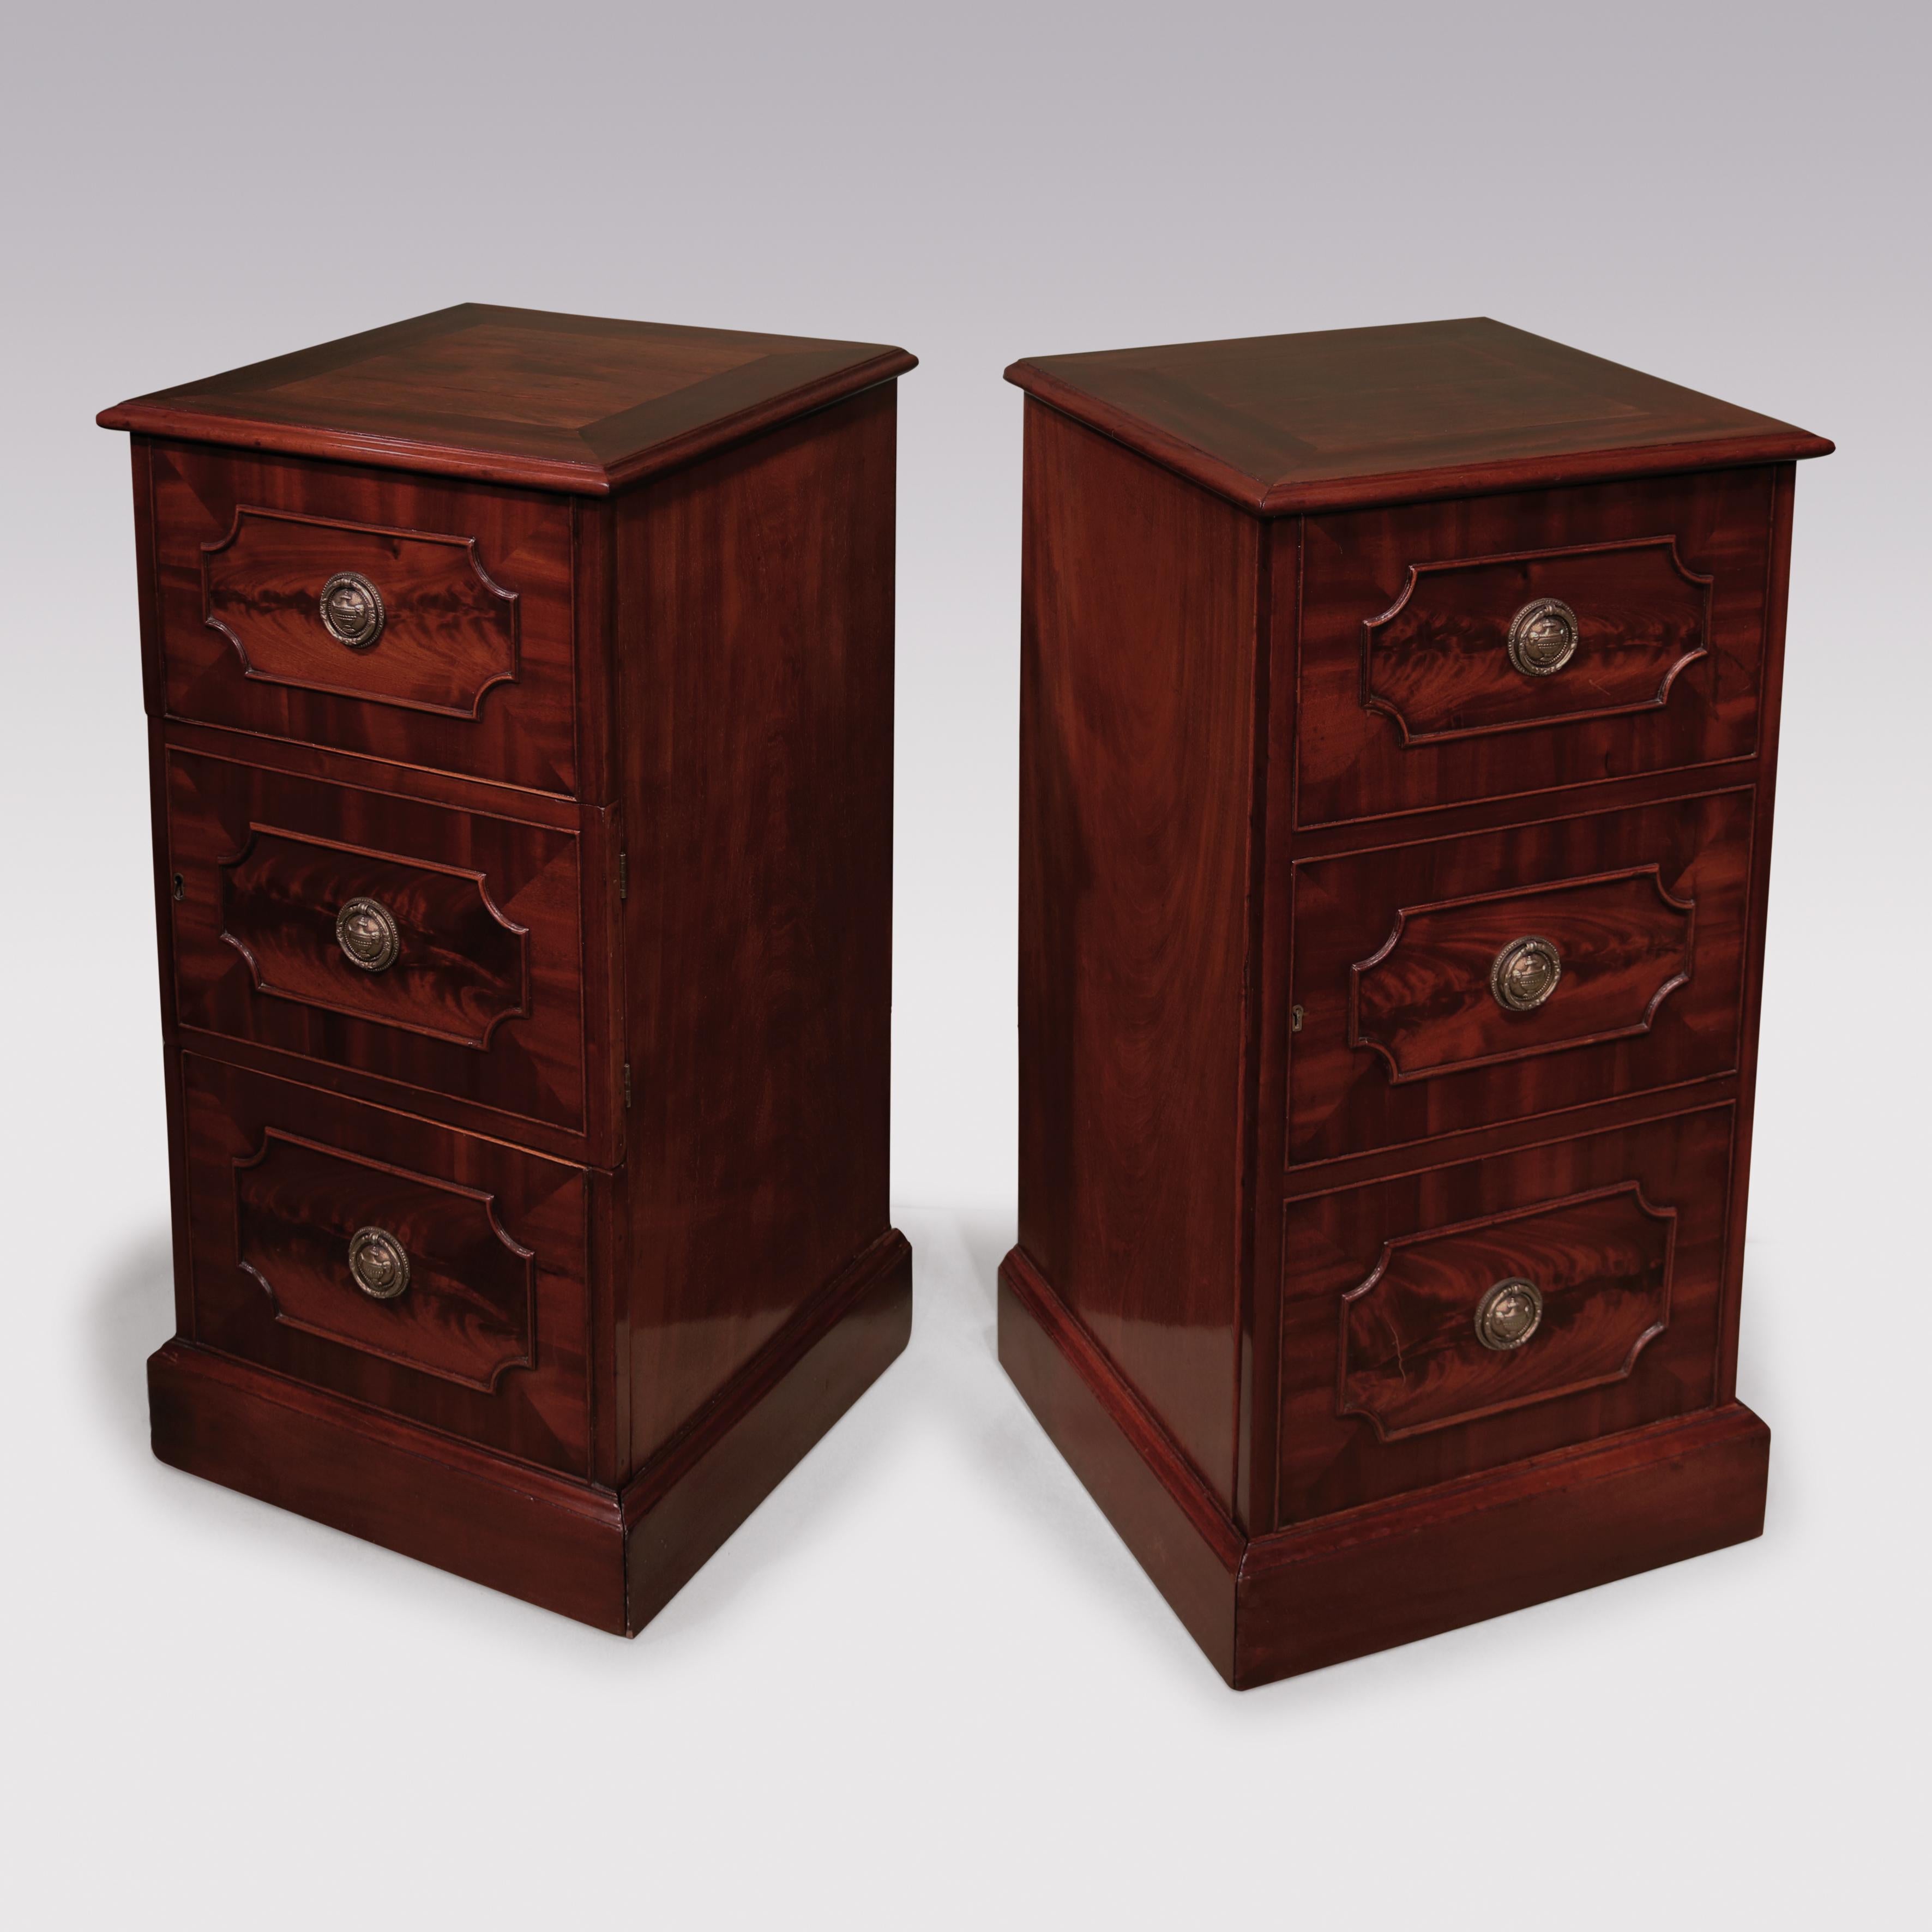 Polished Pair of George III Period Mahogany Dining Room Pedestal Cupboards